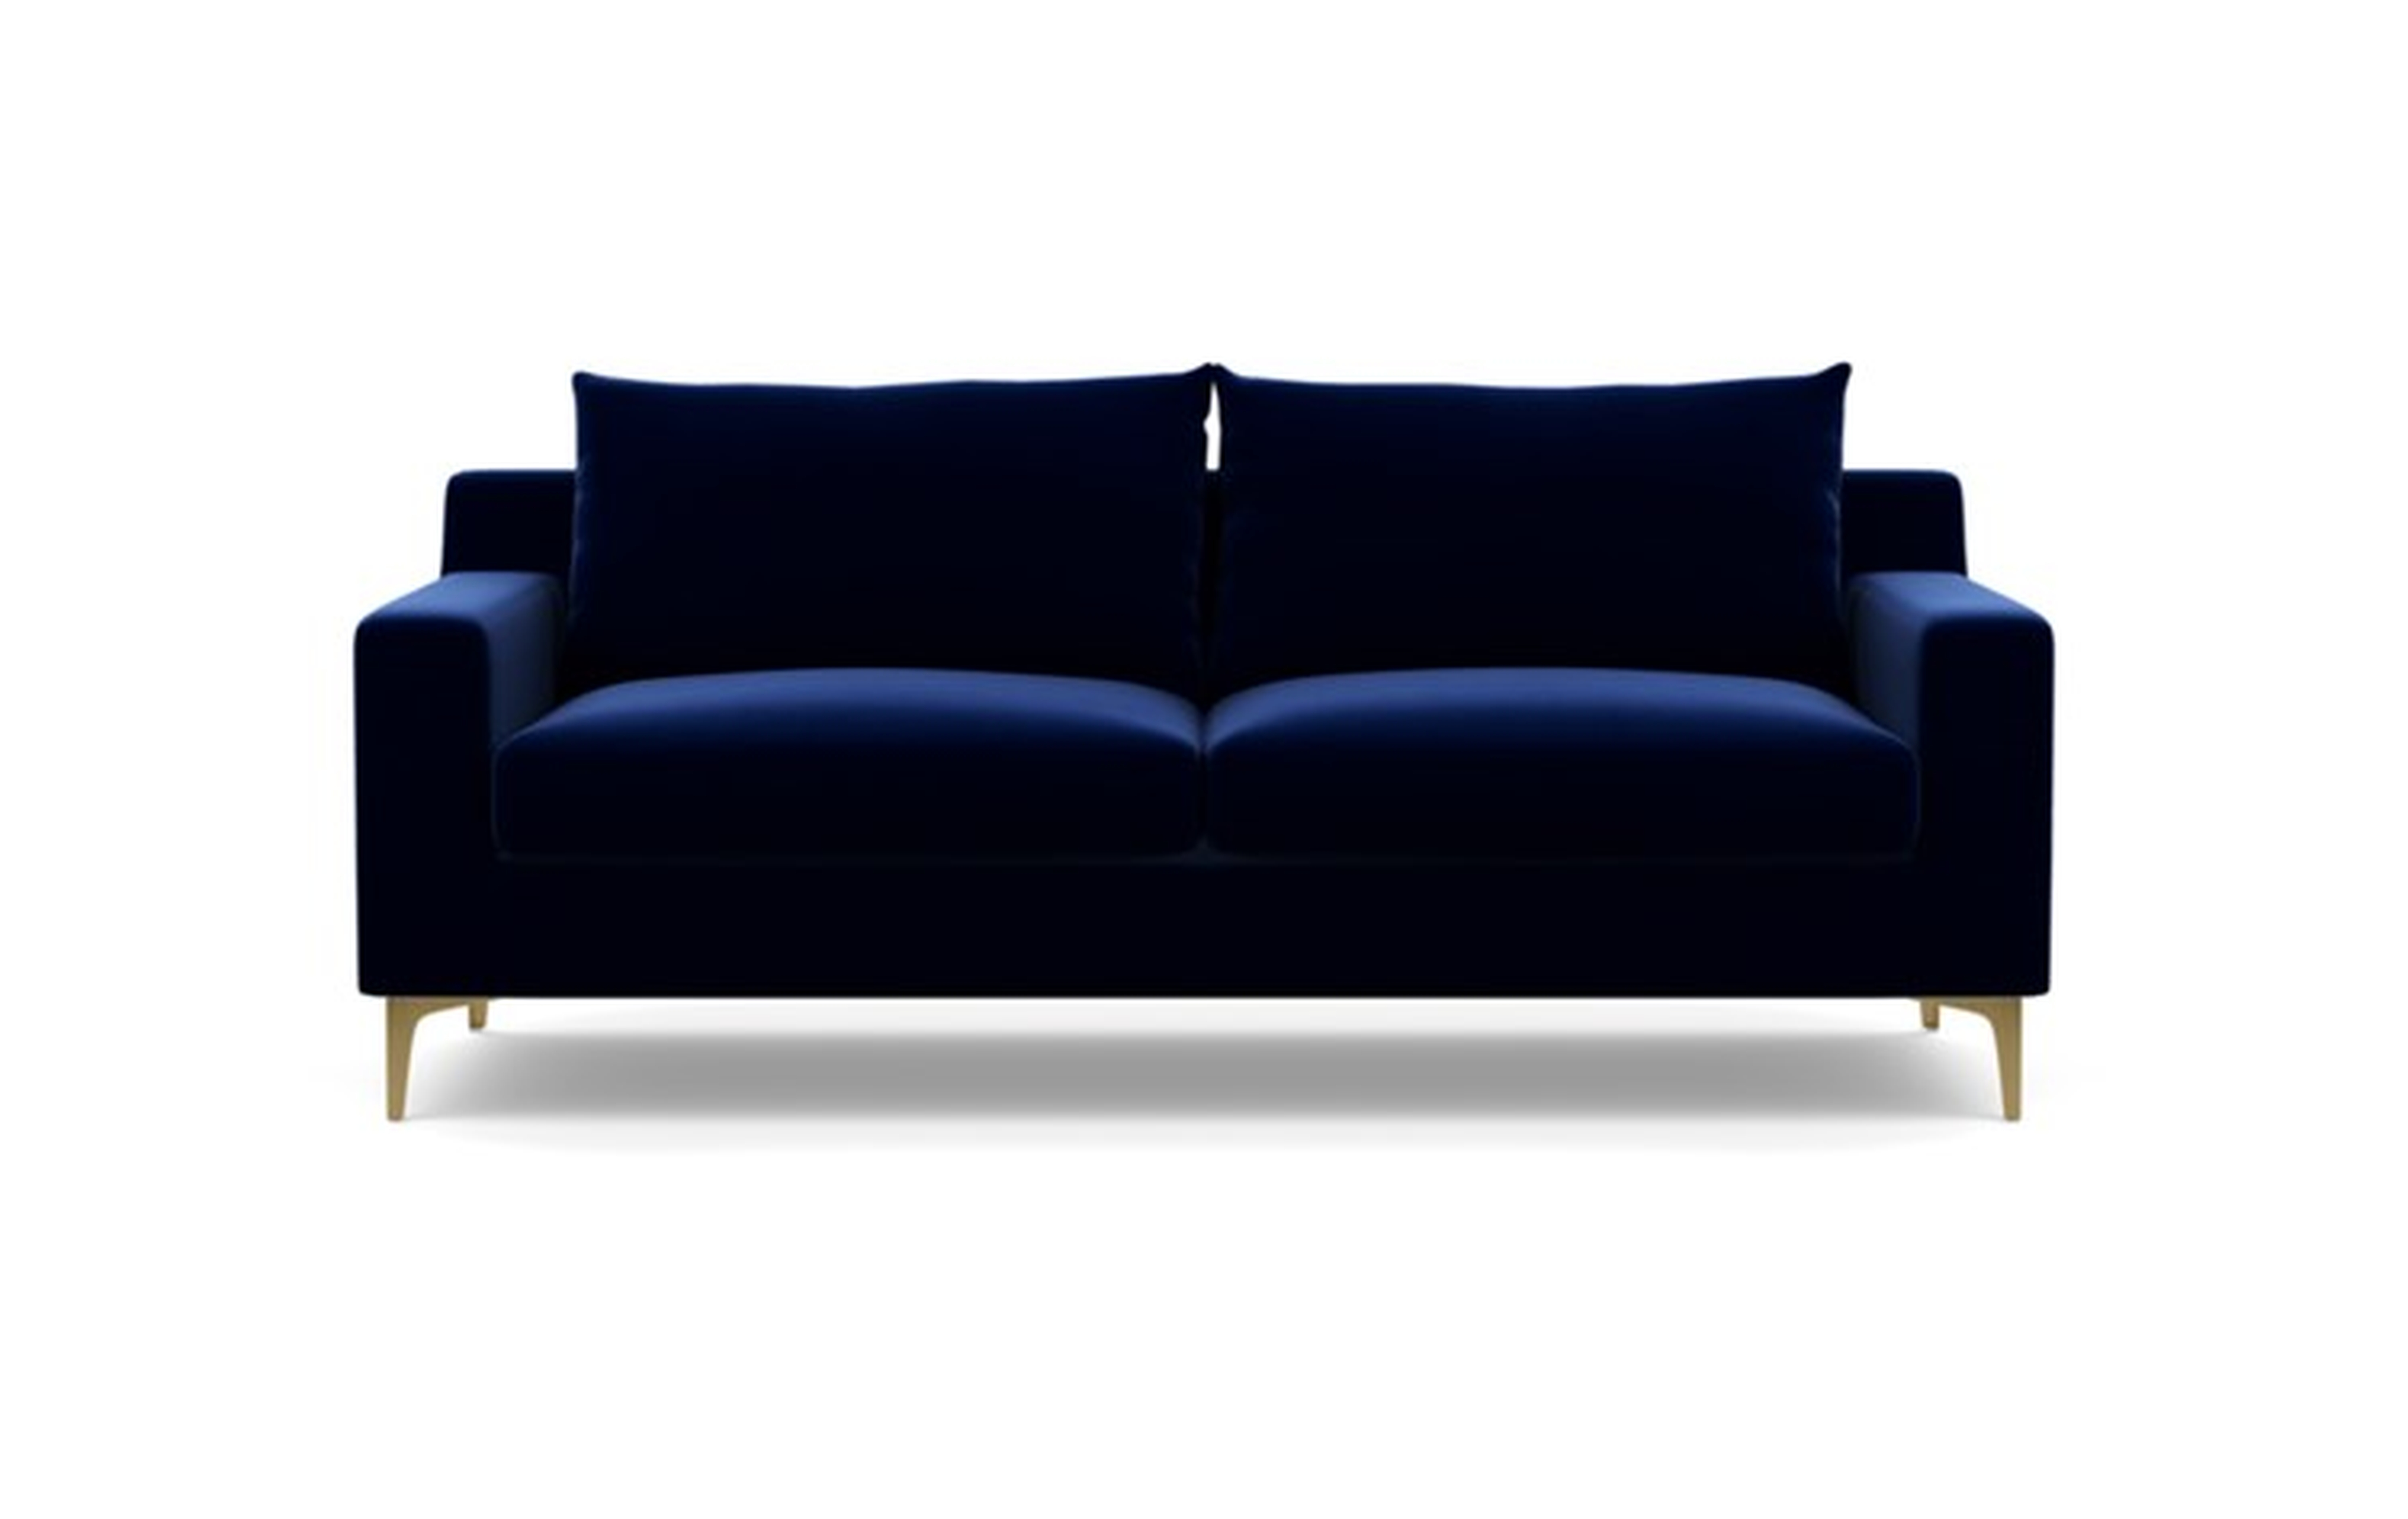 Sloan Sofa with Oxford Blue Fabric and Brass Plated legs - Interior Define